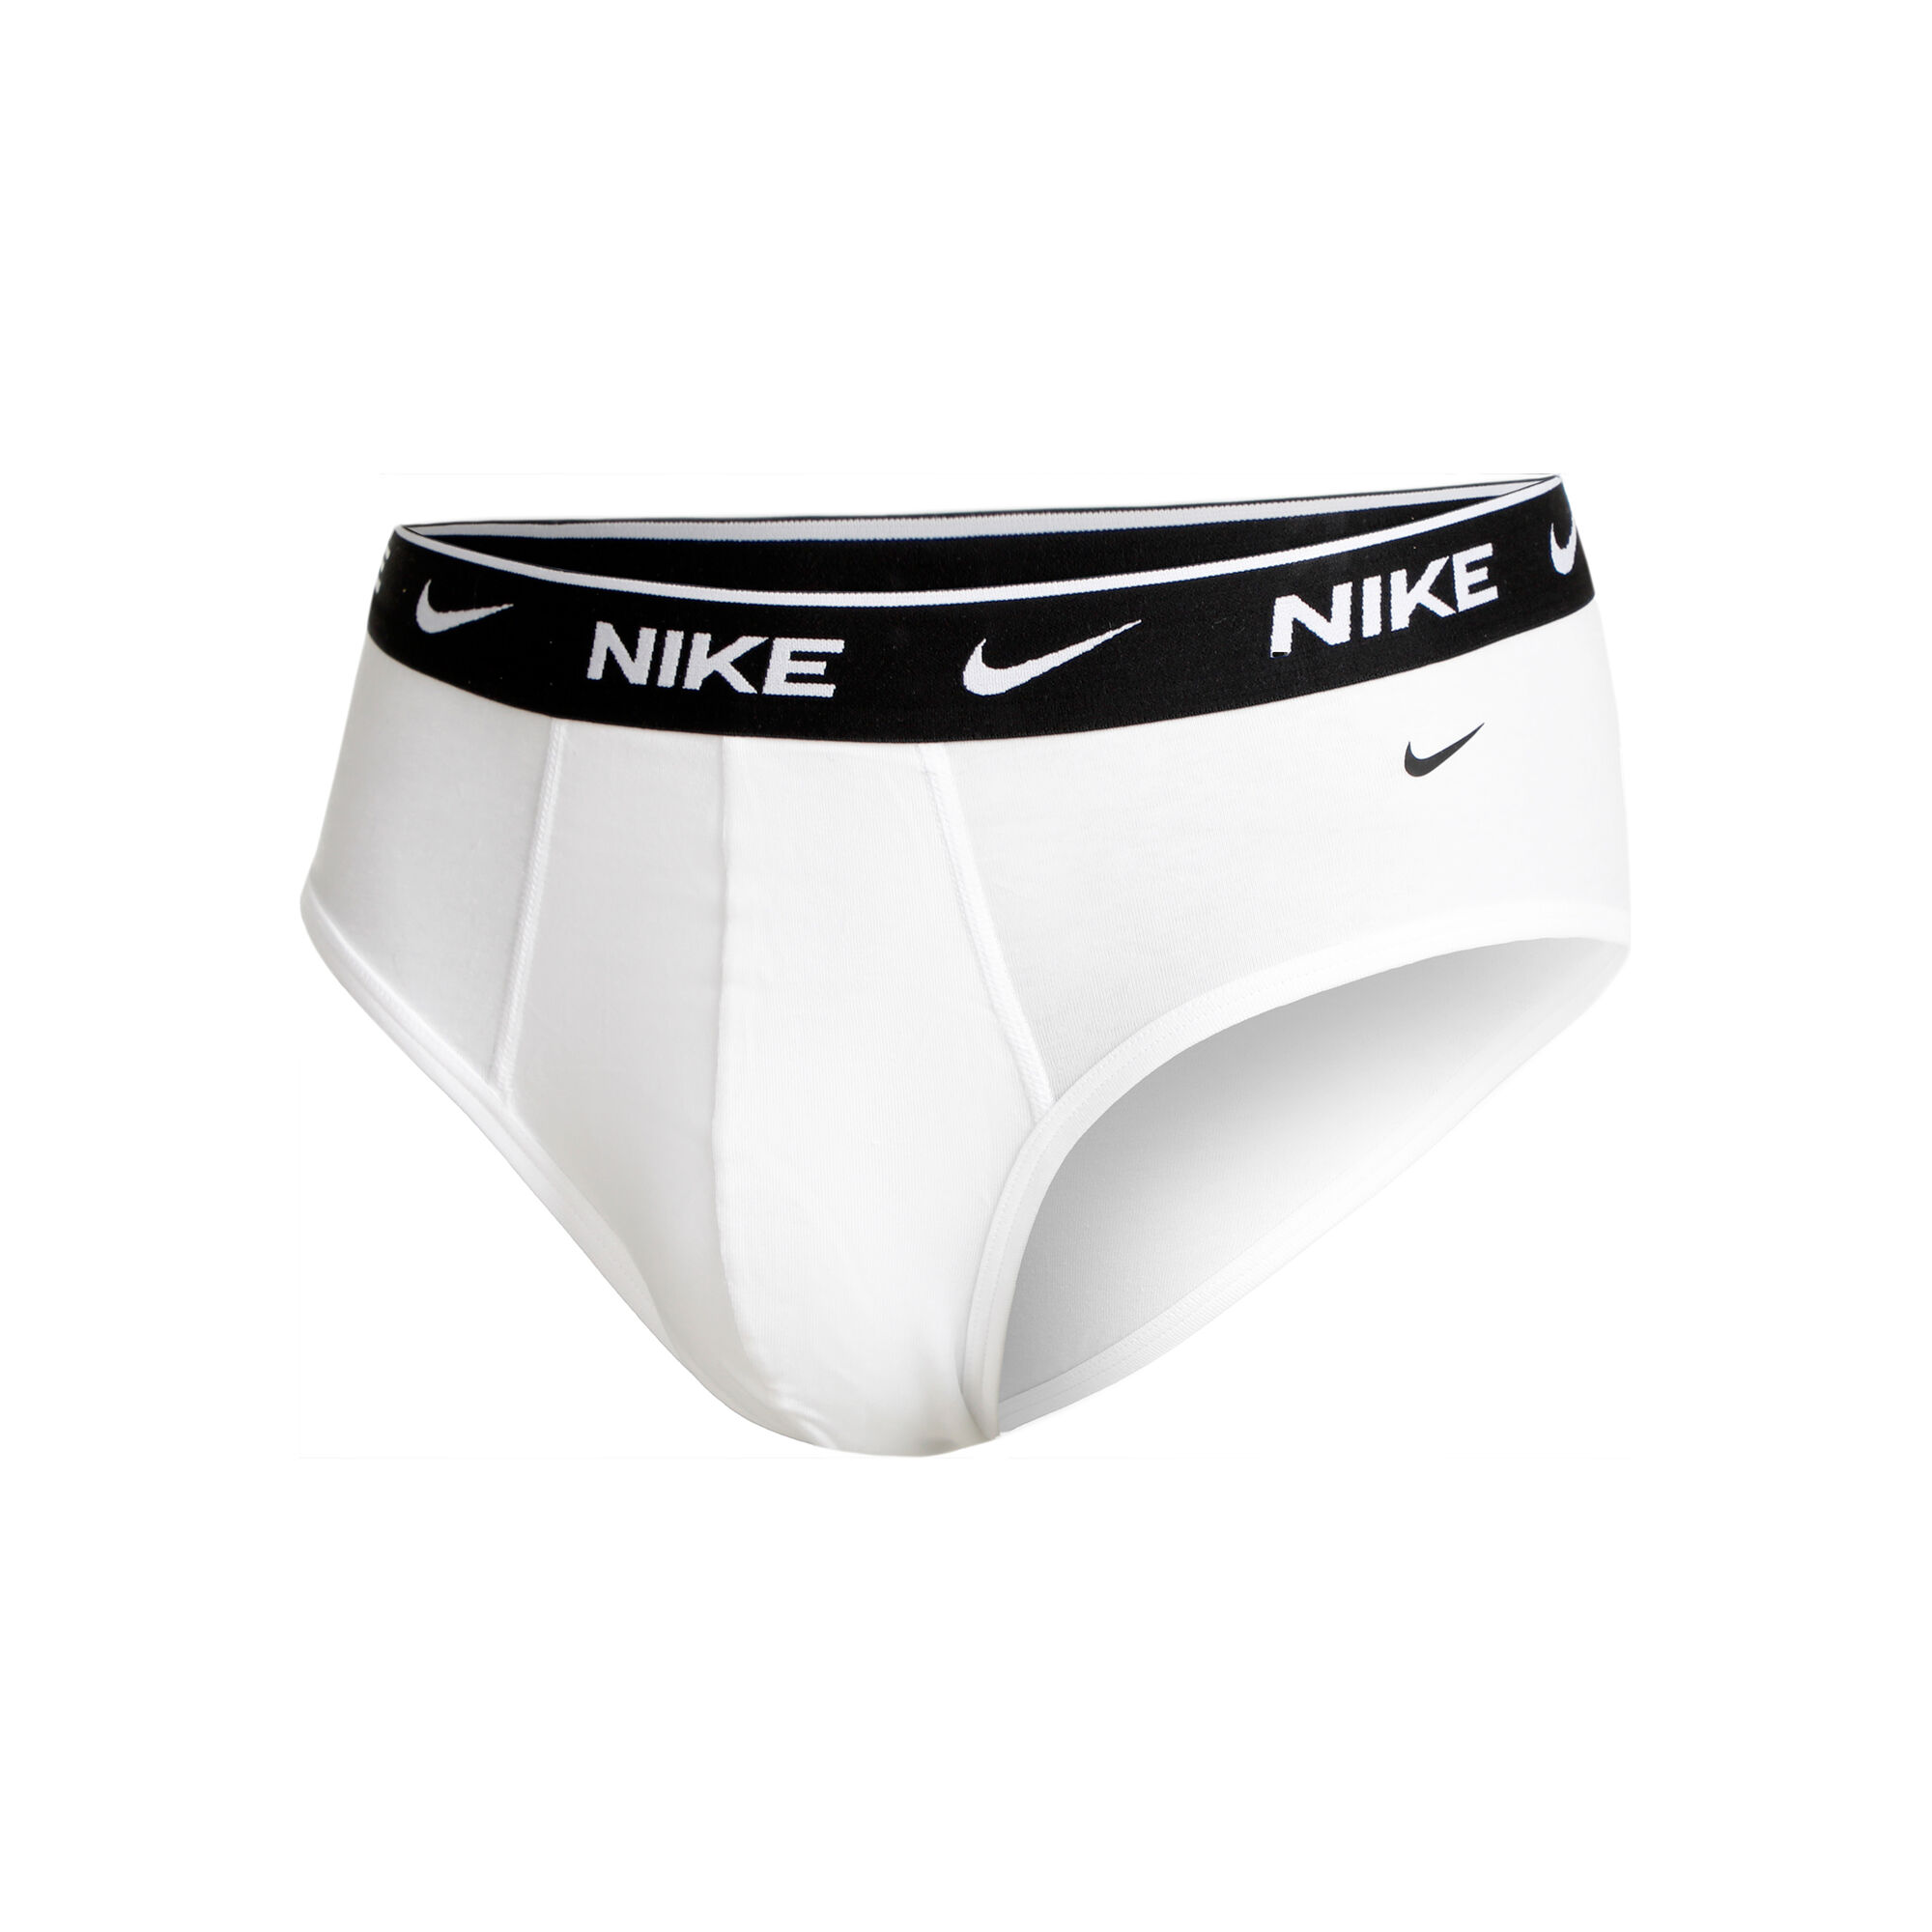 Nike Nike Everyday Cotton Stretch Trunk 3 Pack In White/ Grey/ Black -  FREE* Shipping & Easy Returns - City Beach New Zealand